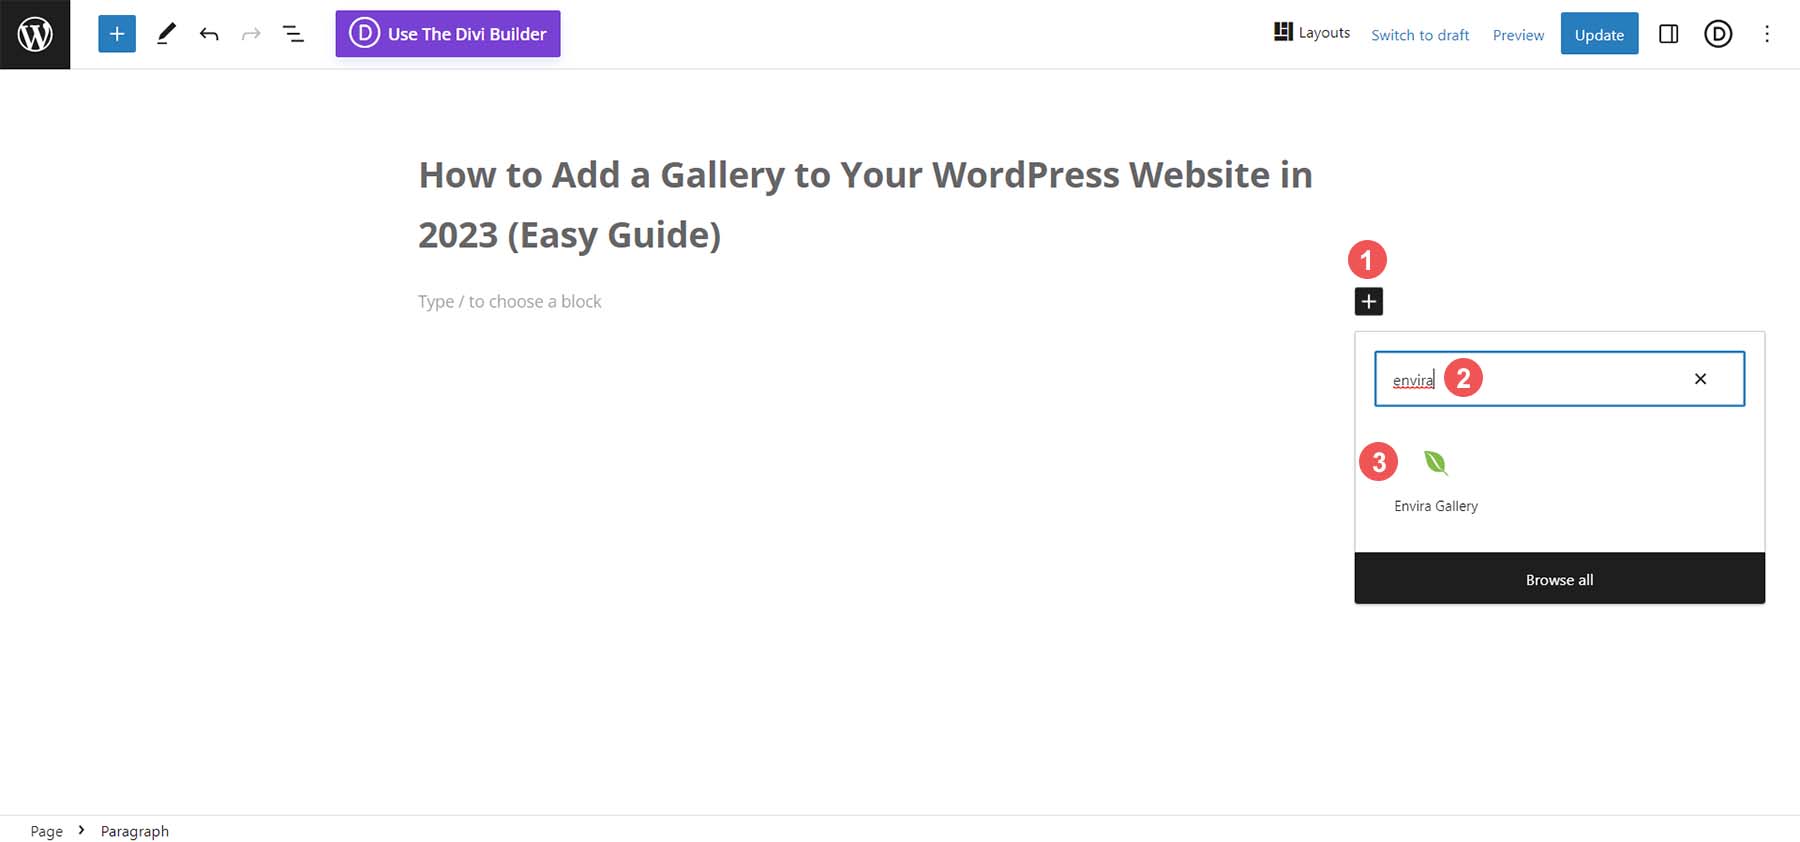 Add your Envira Gallery to your website via Block Editor